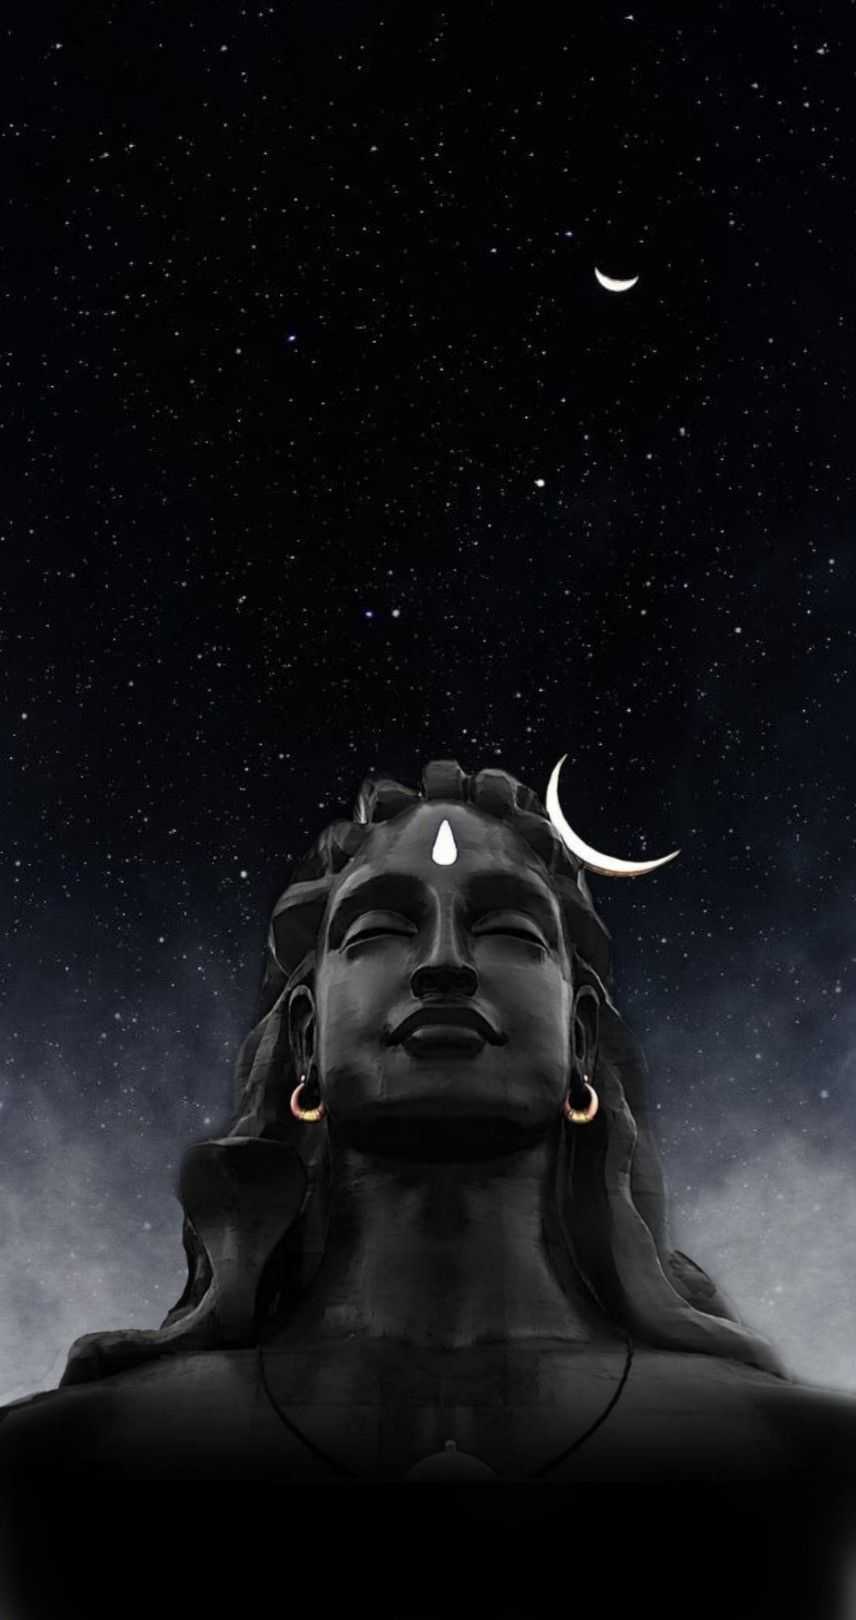 Iphone Ultra Hd Mahadev Full Iphone Ultra Hd Shiva Wallpaper Download Hd Apple Iphone X Wallpapers Best Collection Camiloser